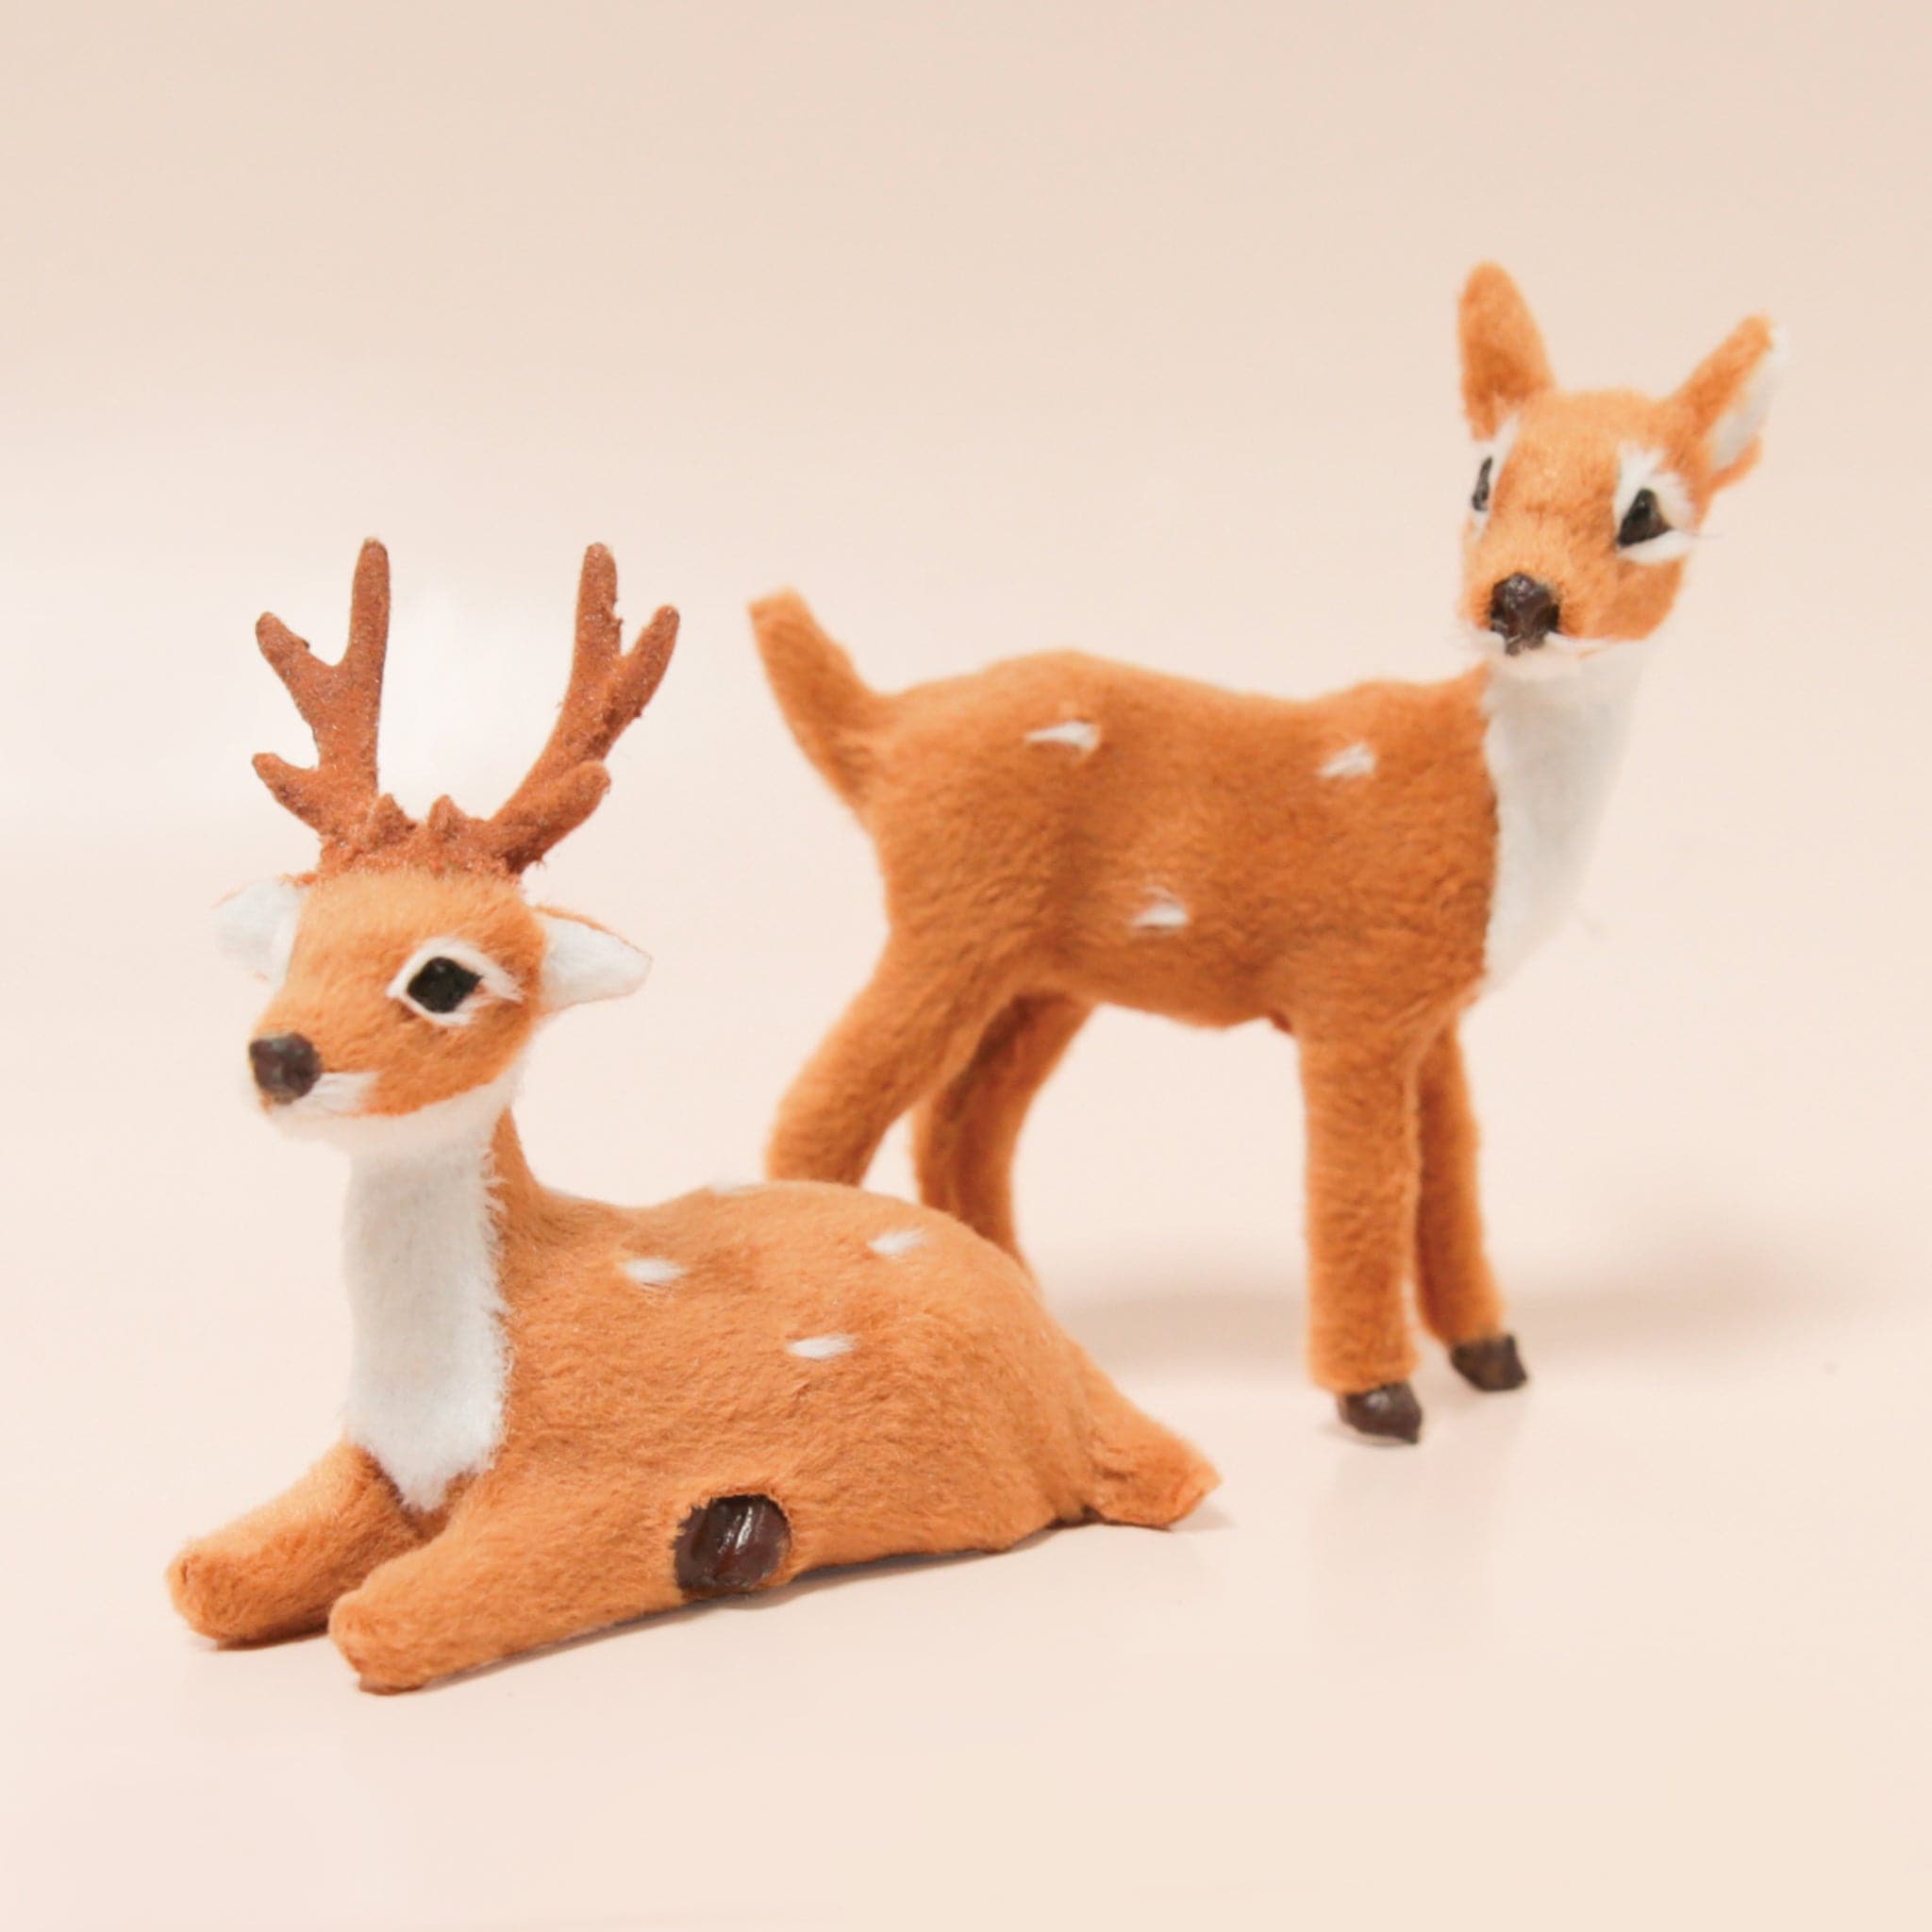 A brown faux fur covered seated reindeer buck figure rests in front of a matching fawn figure.